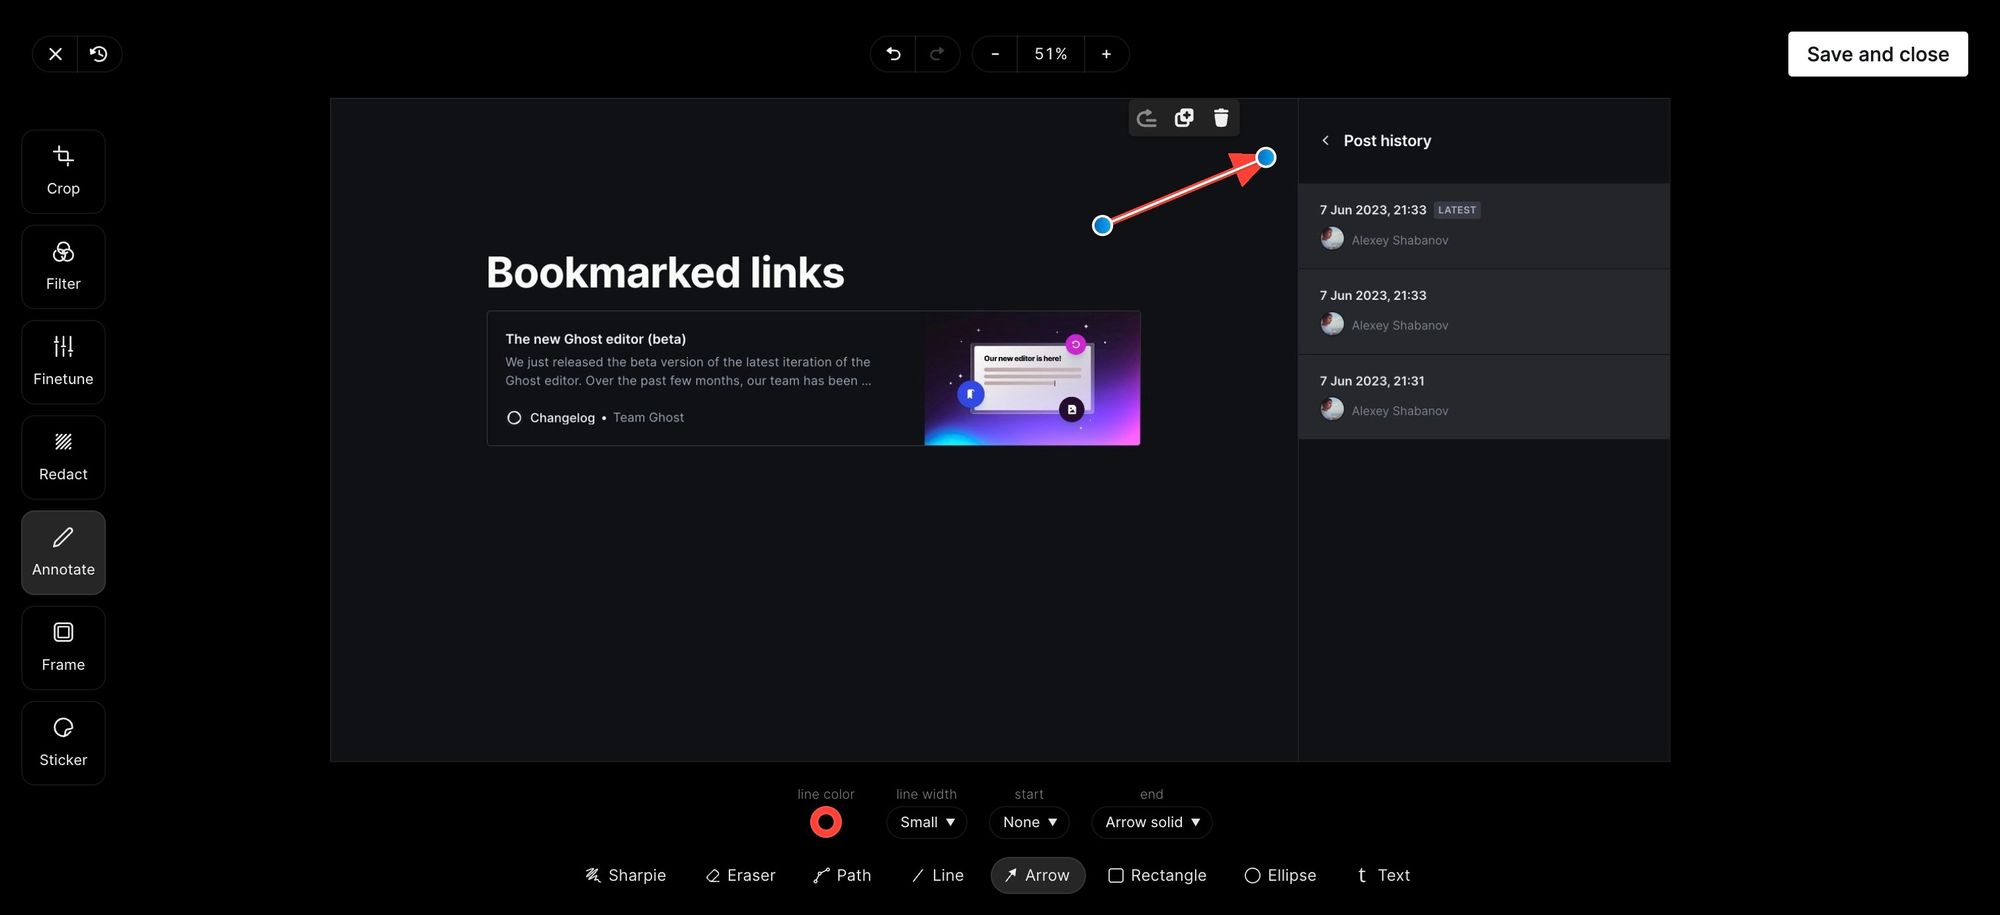 Ghost.io rolled out a new editor  featuring image editing, edition history, and Chrome bookmarker extension